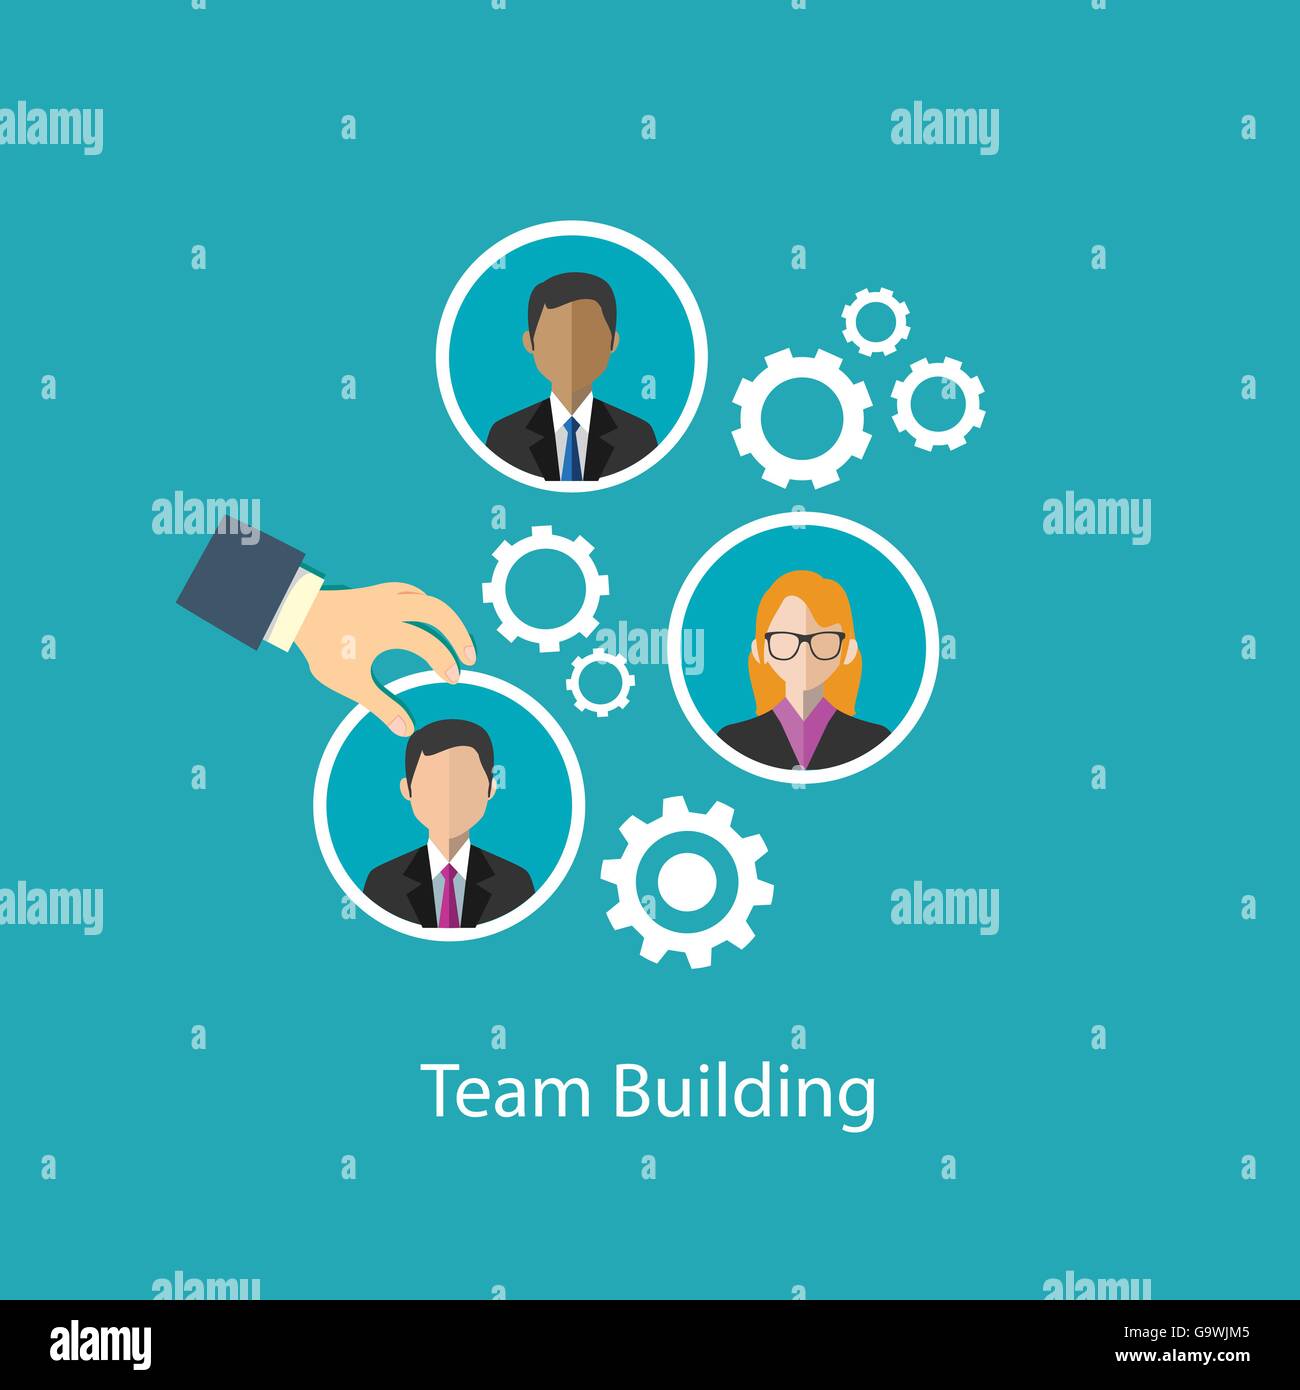 team building human resource icons illustration Stock Vector